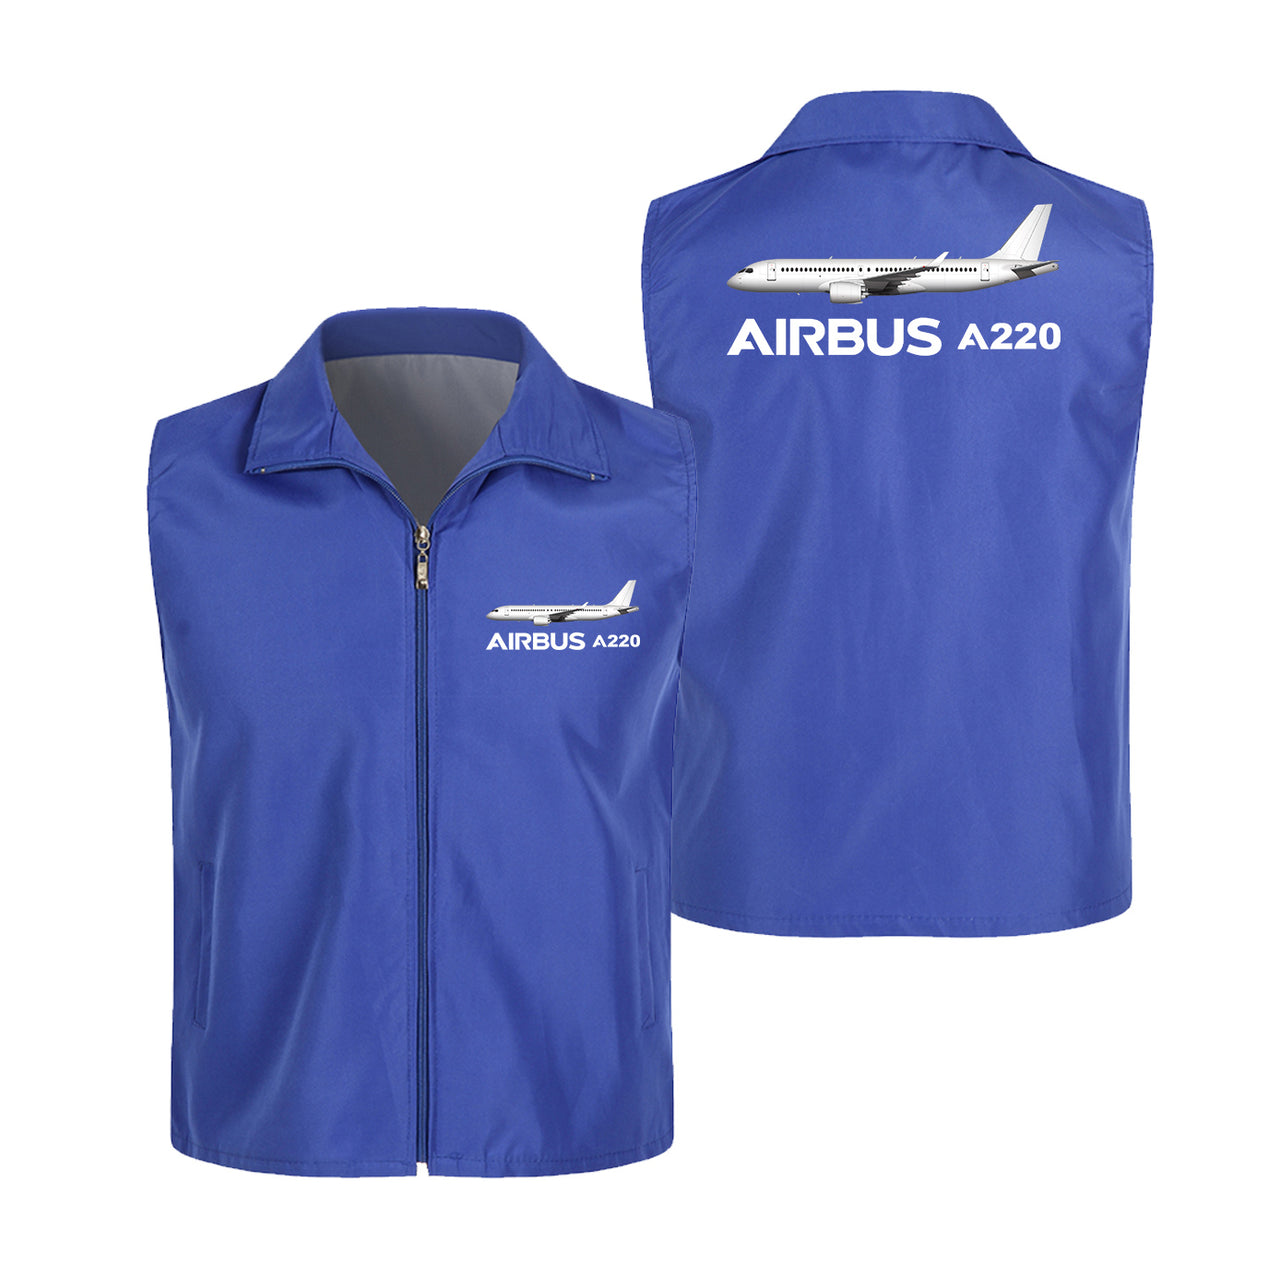 The Airbus A220 Designed Thin Style Vests